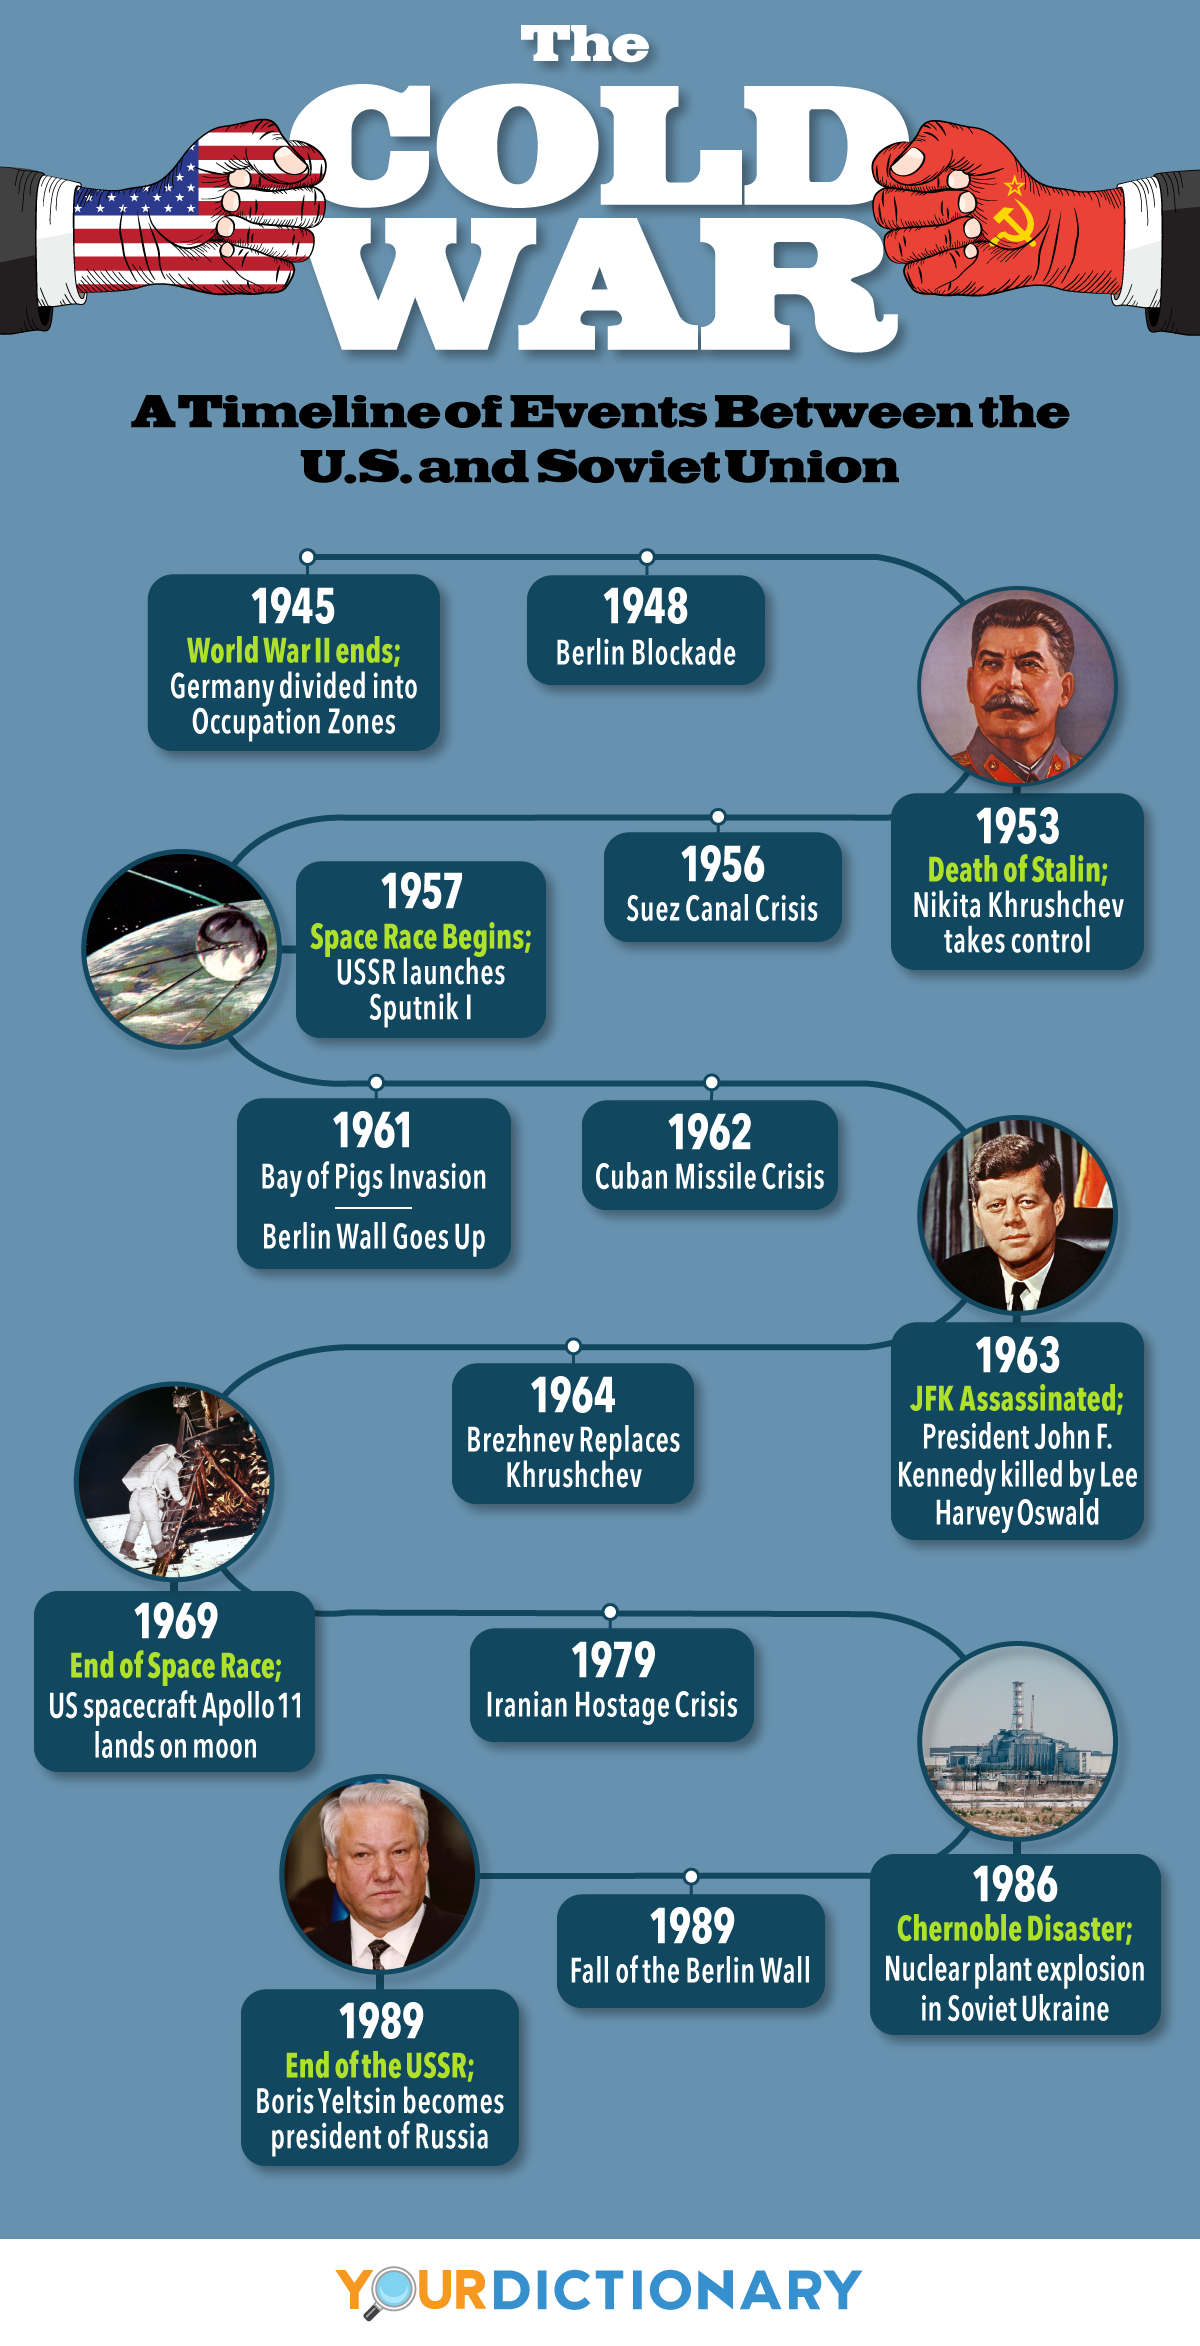 The Cold War Timeline of Events